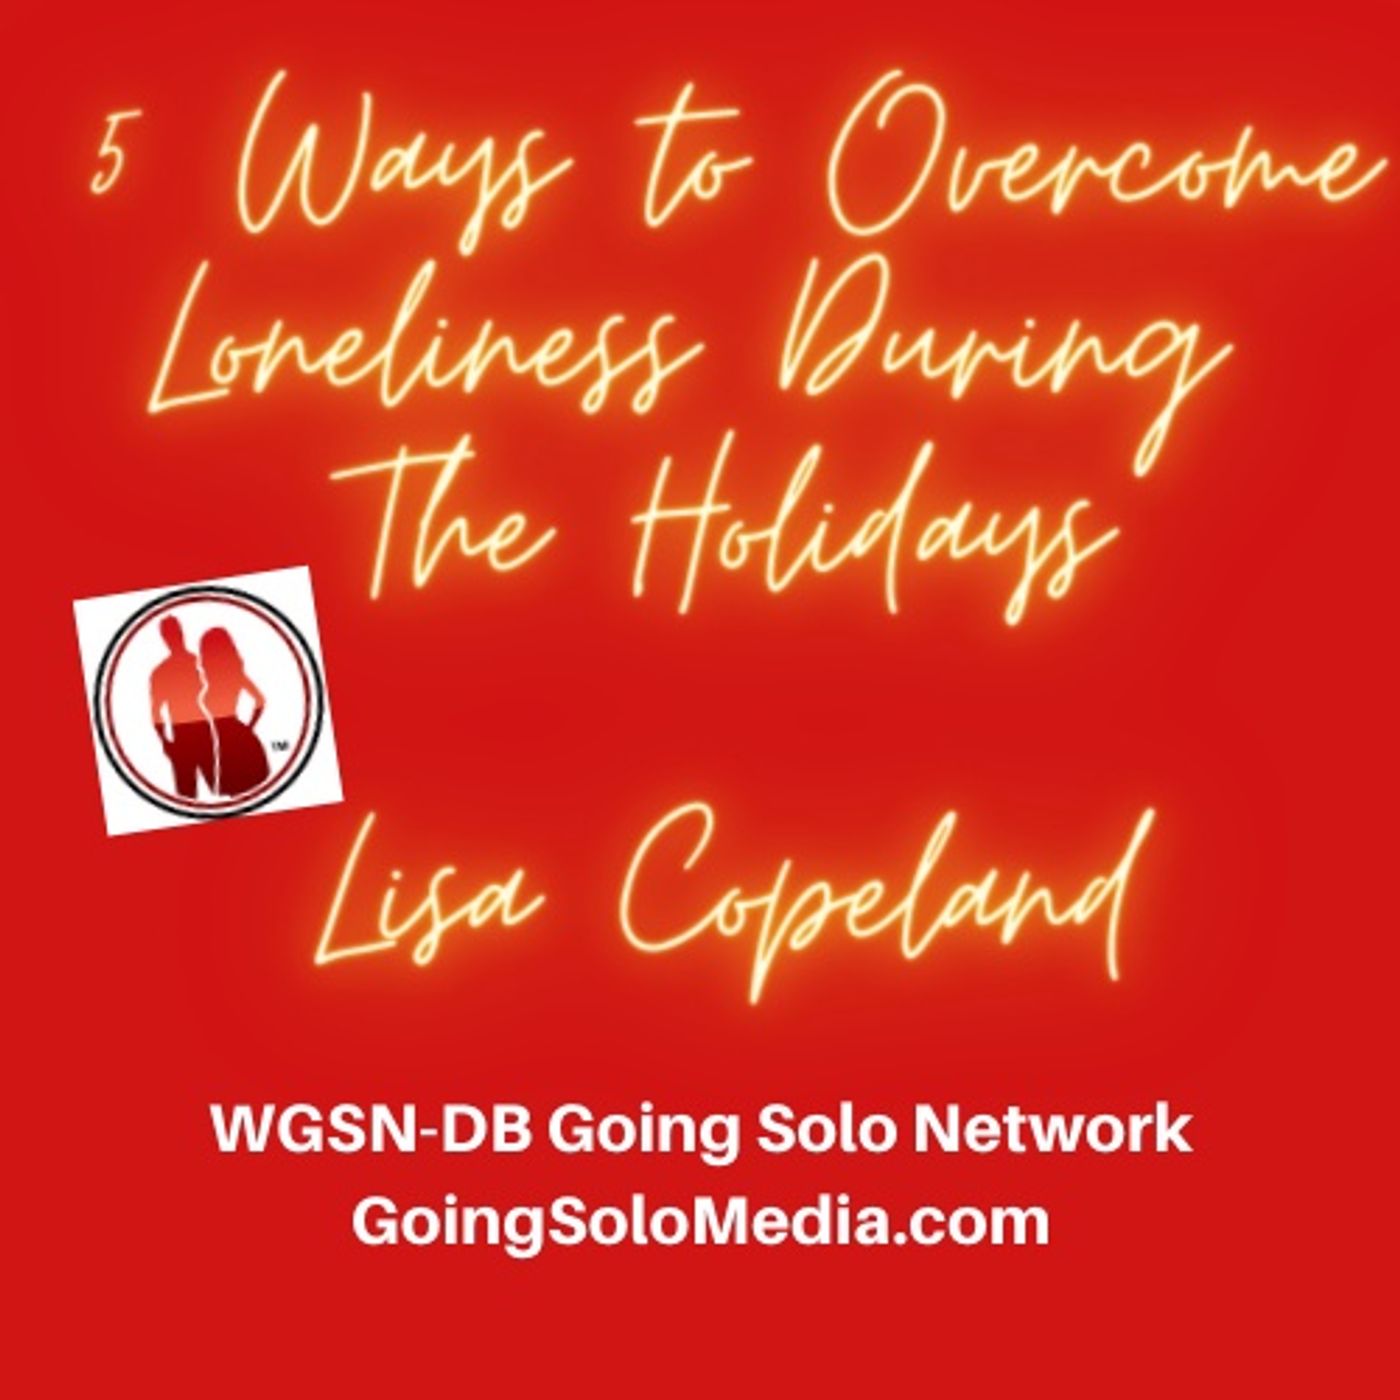 5 Ways to Overcome Loneliness During The Holidays